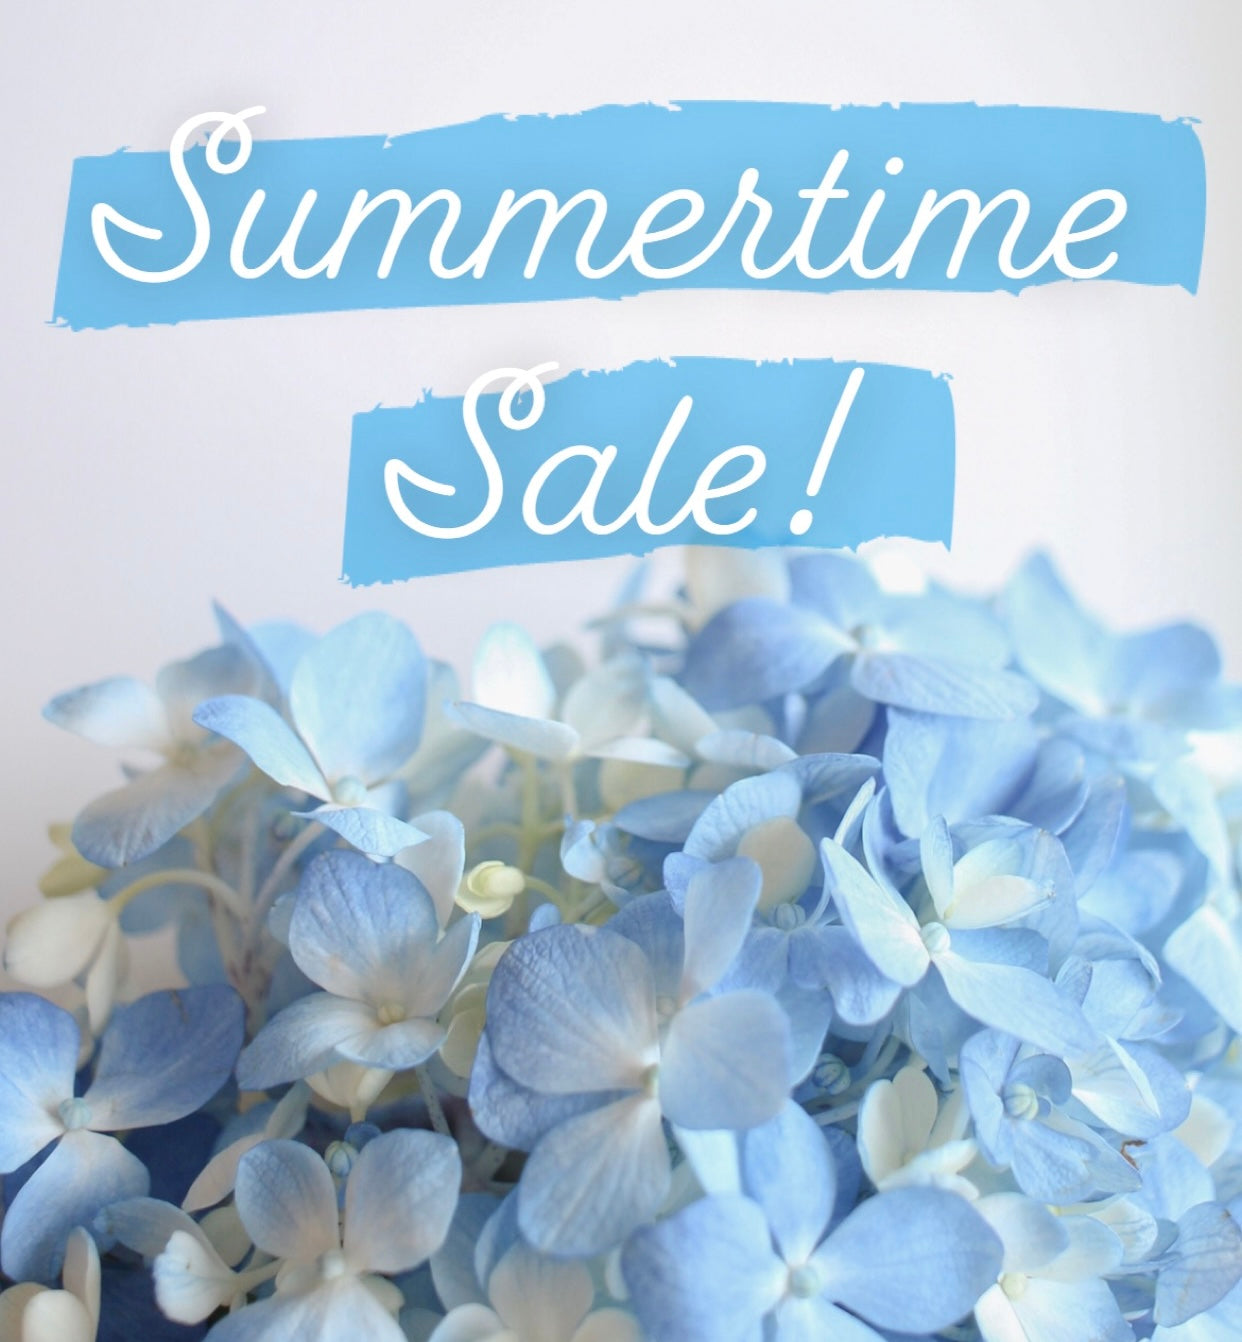 Summertime Sale is Calling